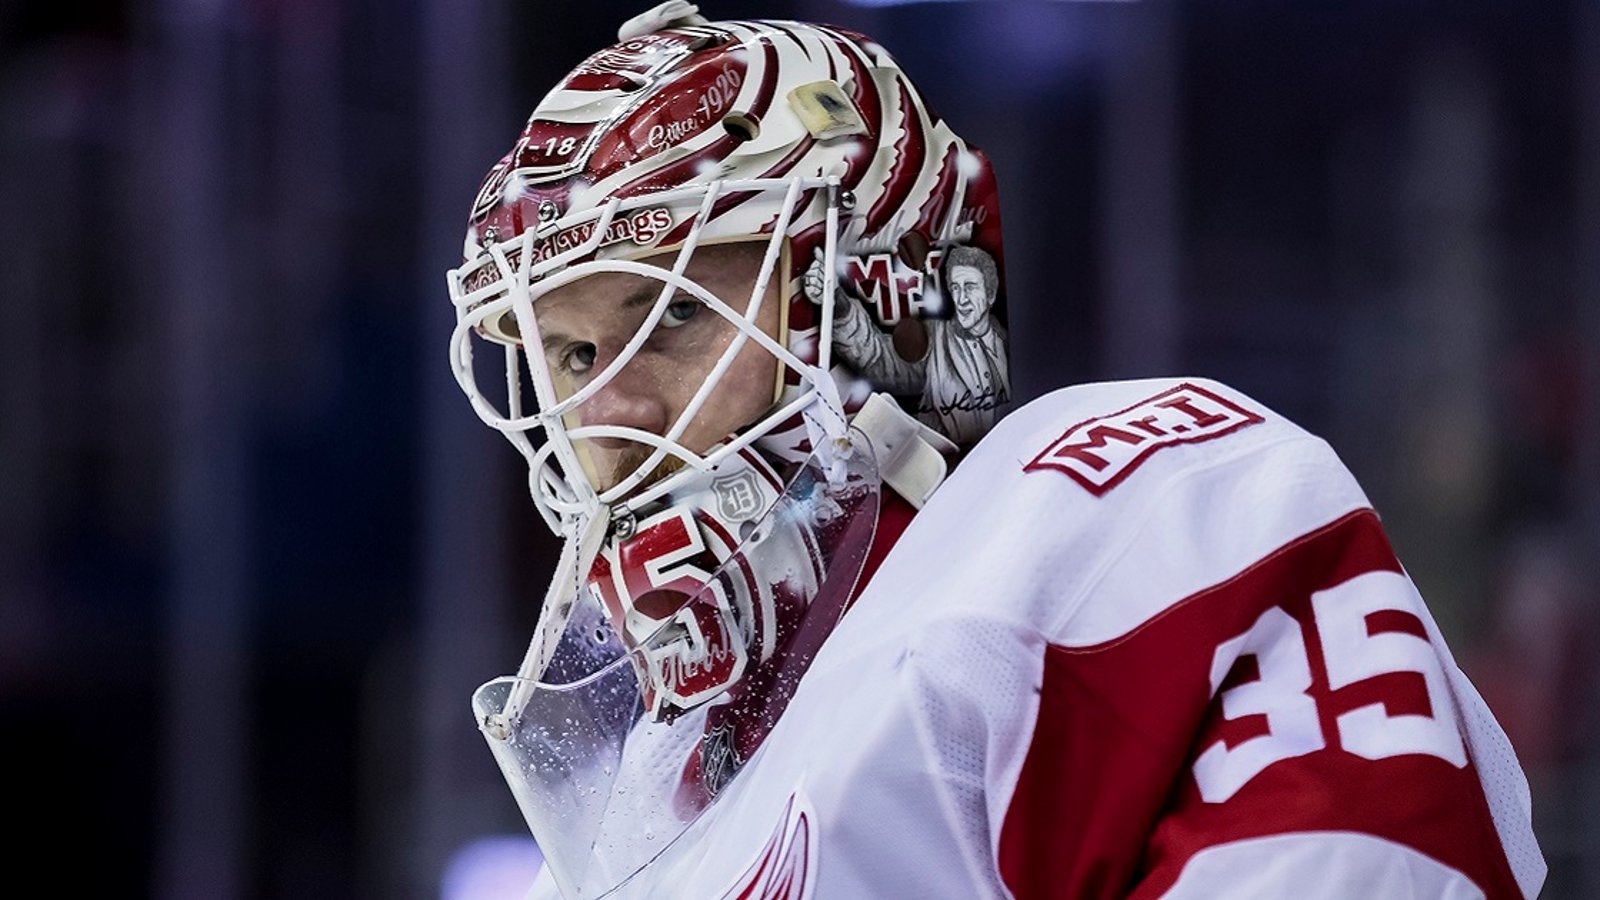 Big updates on Red Wings Jimmy Howard and Anthony Mantha.